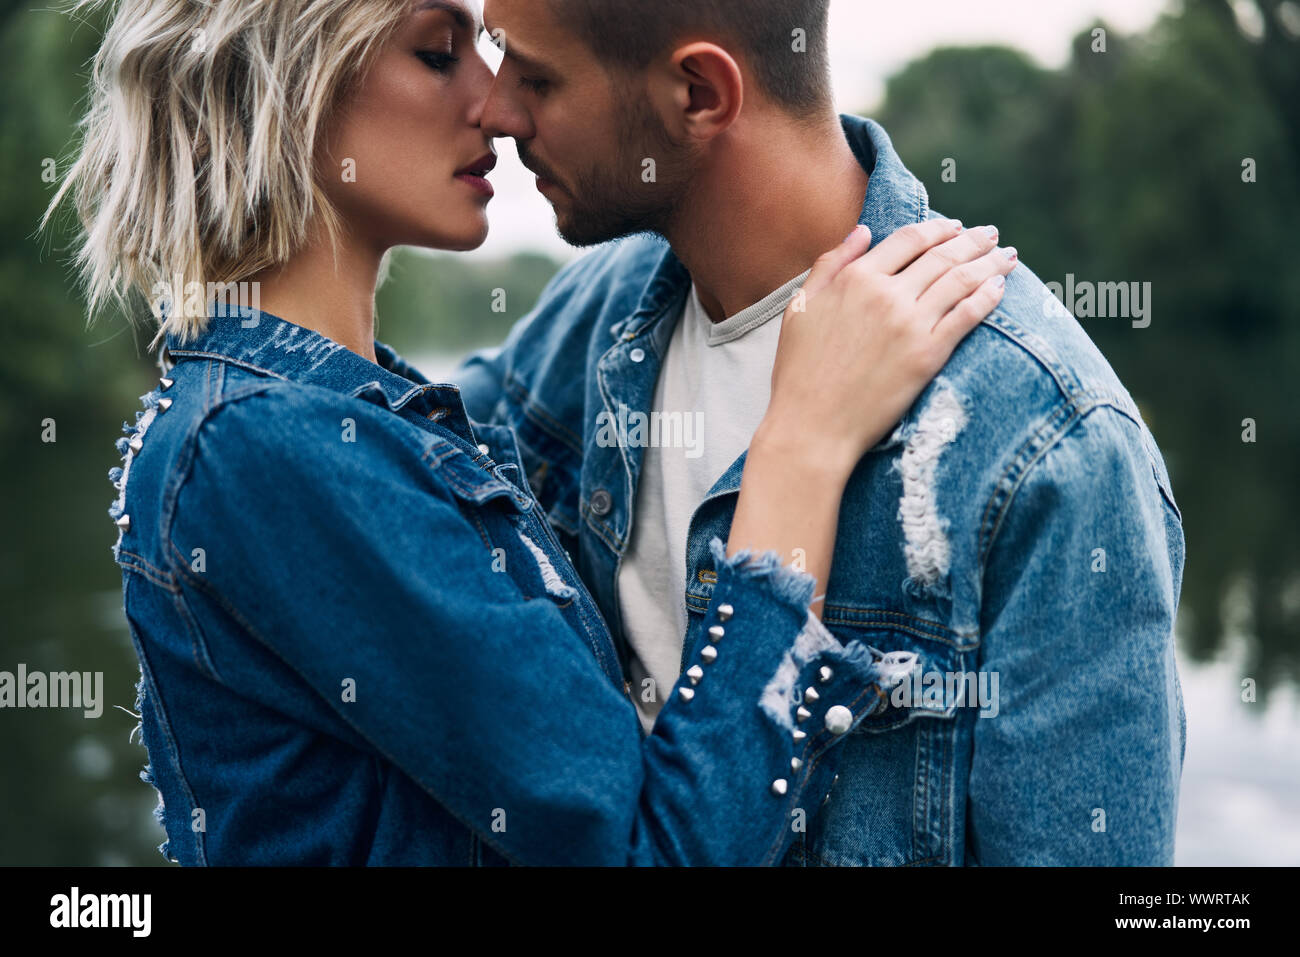 Young loving couple kissing and enjoying the company of each other outdoors. Love, passion, dating concept Stock Photo